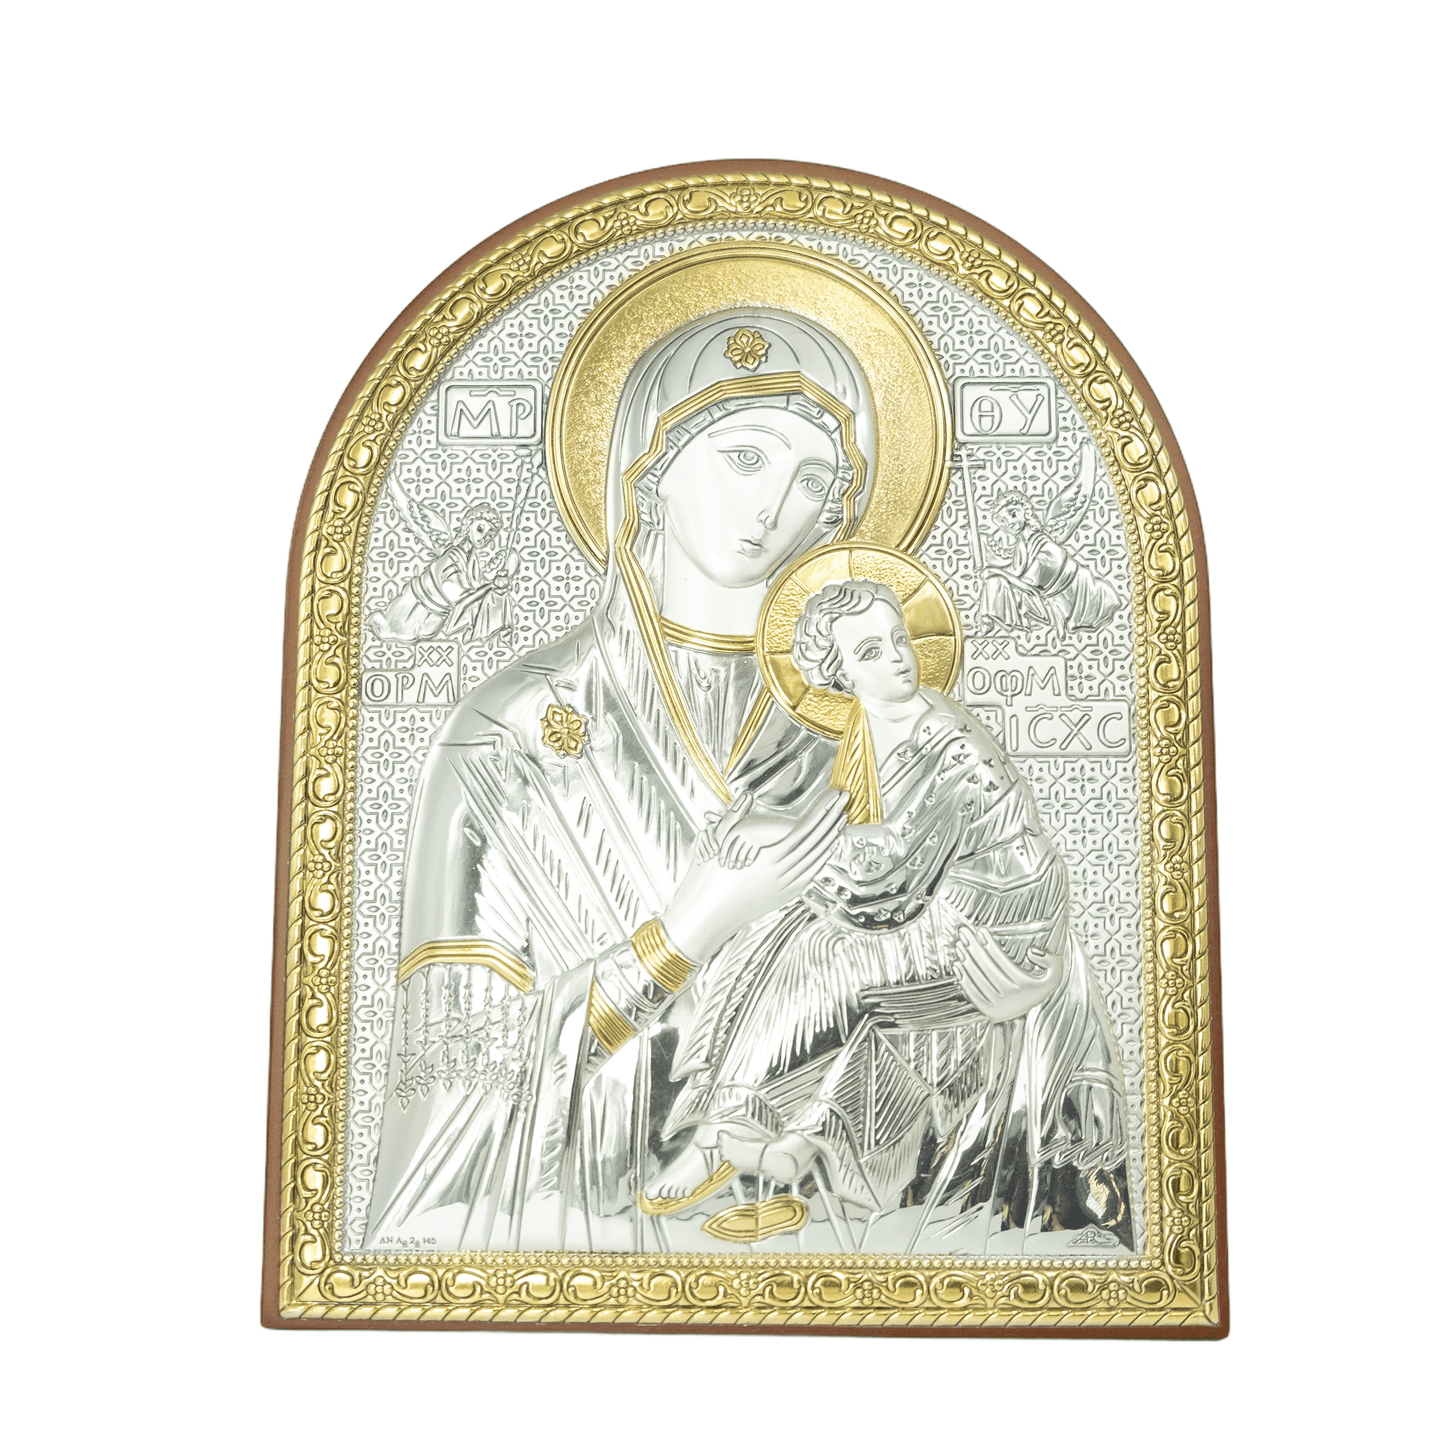 MONDO CATTOLICO 18X14 cm Our Lady of Perpetual Help Bilaminated Sterling Silver and Golden Details